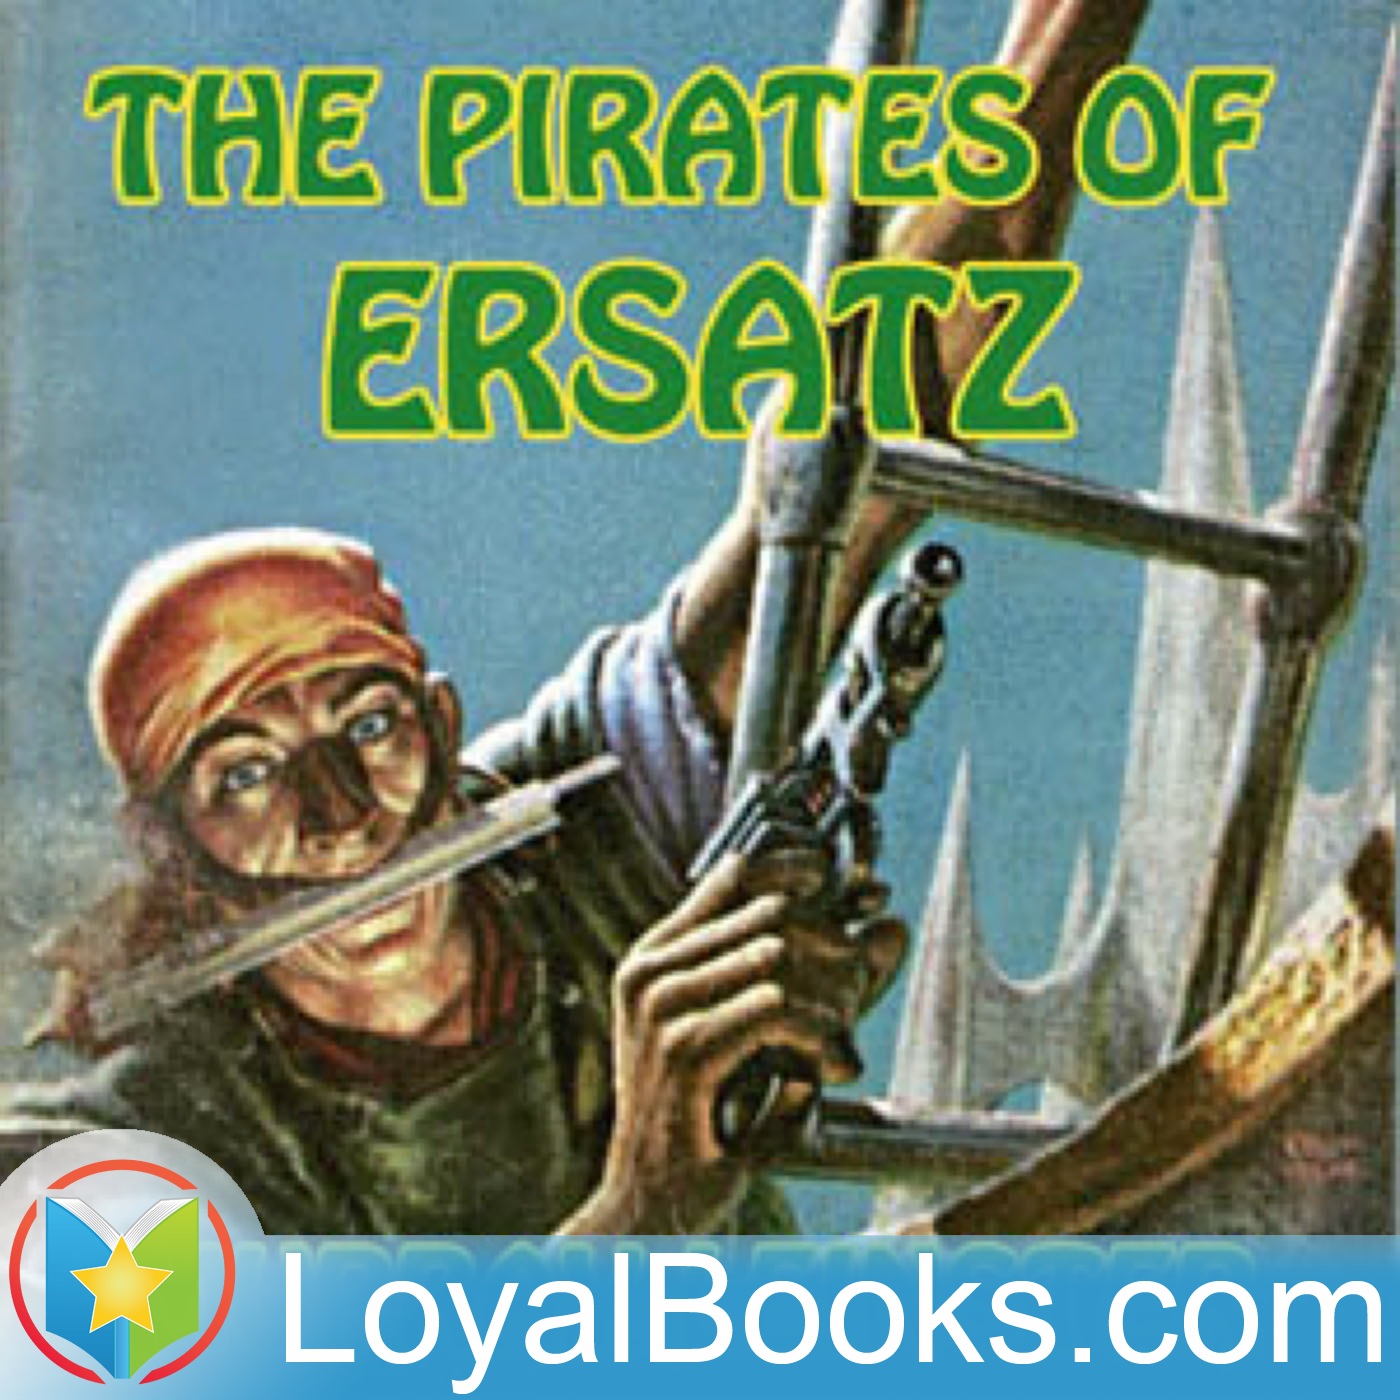 The Pirates of Ersatz by Murray Leinster